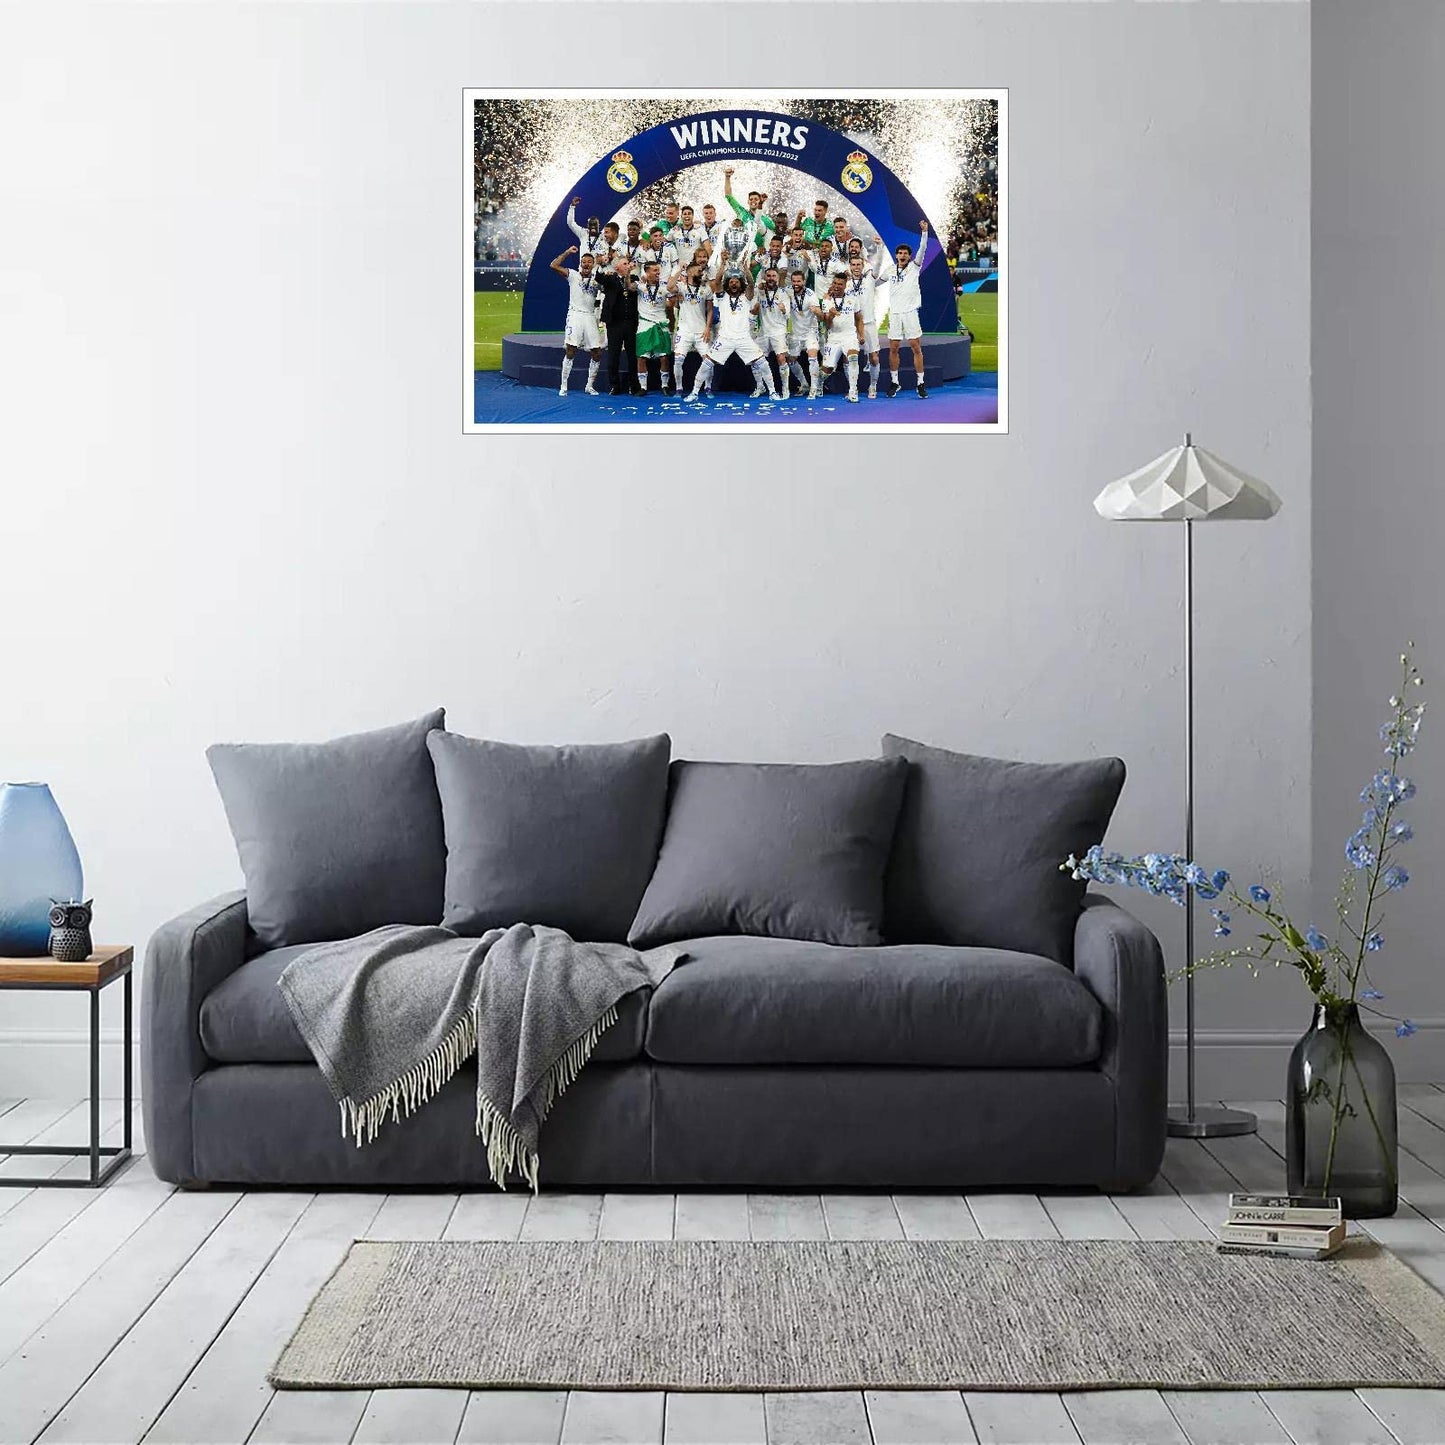 Real Madrid CF Champions League Winners 2022 Poster Canvas Prints Poster Wall Art For Home Office Decorations Unframed 13"x8"